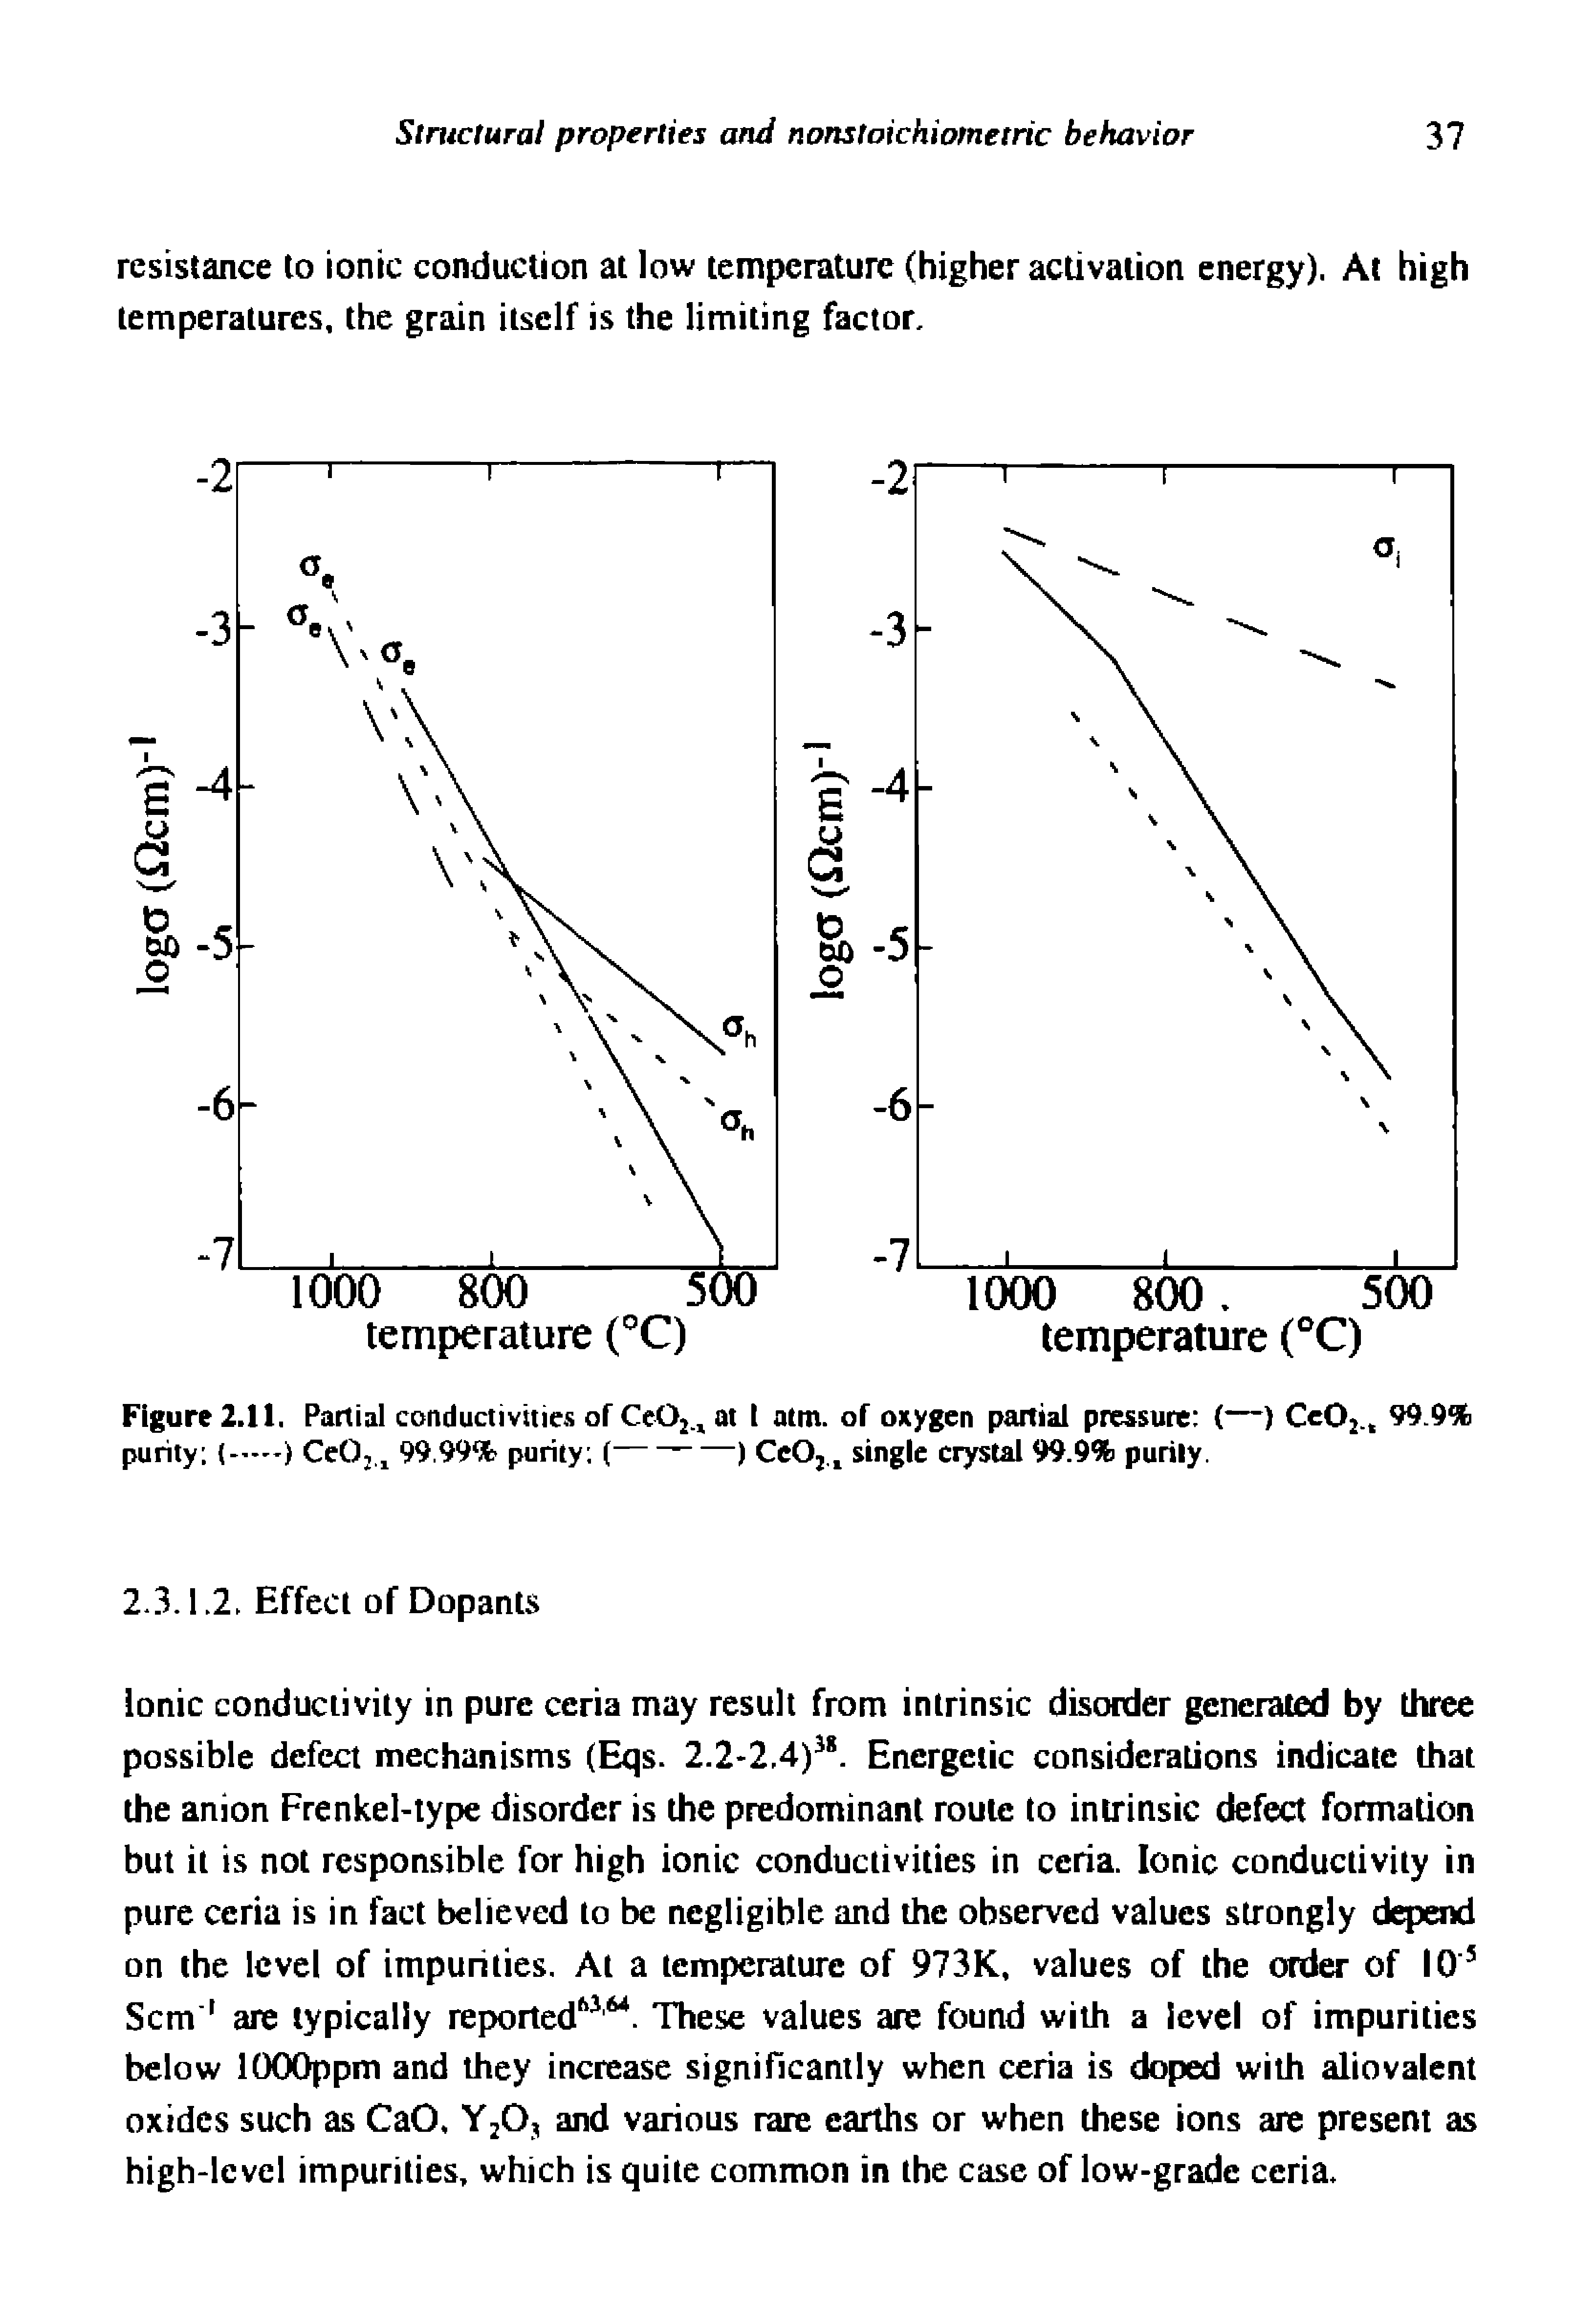 Figure 2.11. Partial conductivities of Ce02. at I atm. of oxygen partial pressure (—) CCO2. 99.9% purity (...) CeOj.j 99.99% purity (-----------) CcOj. single crystal 99.9% purity.